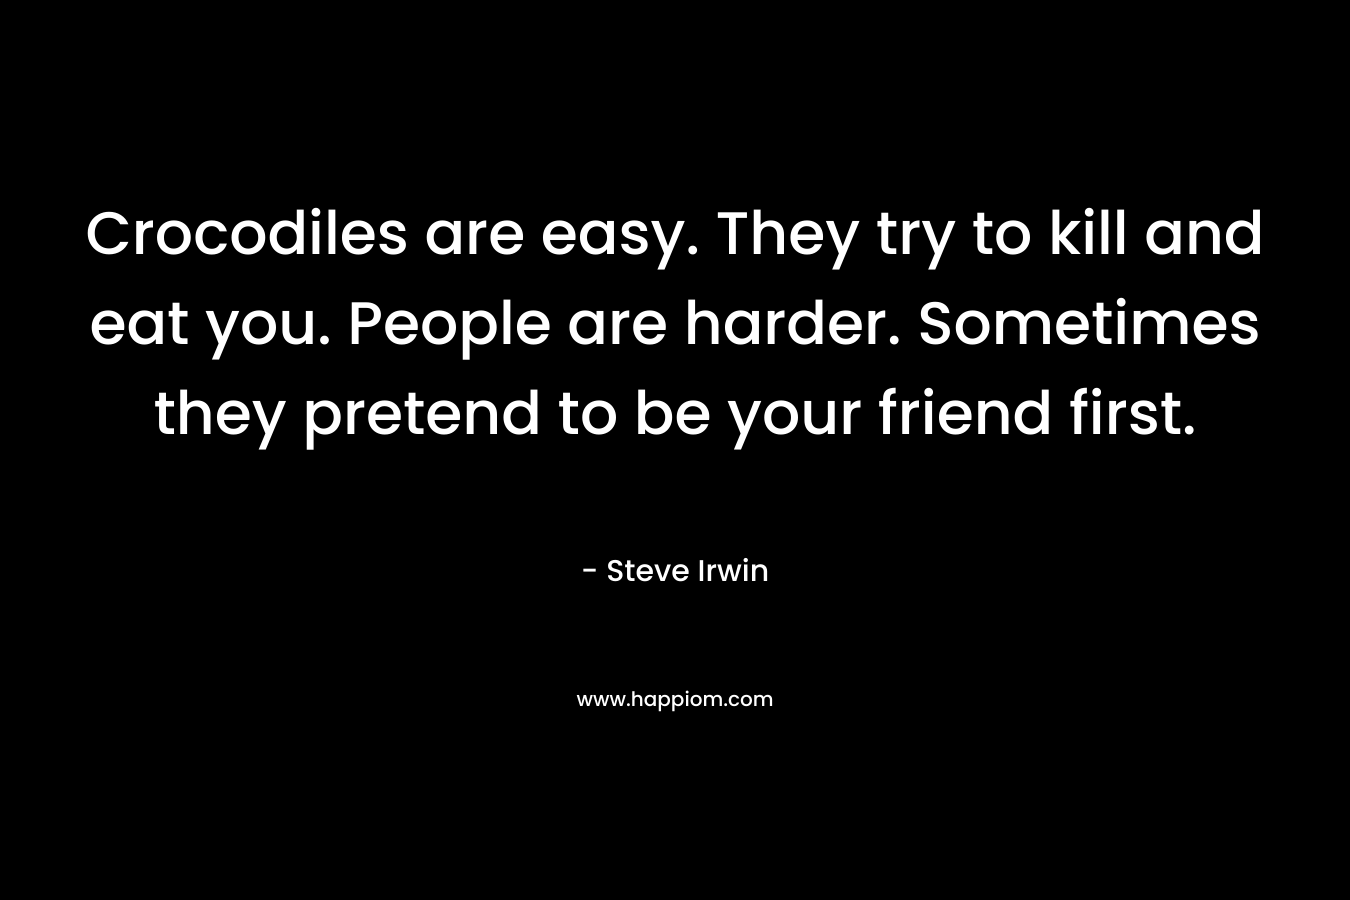 Crocodiles are easy. They try to kill and eat you. People are harder. Sometimes they pretend to be your friend first. – Steve Irwin